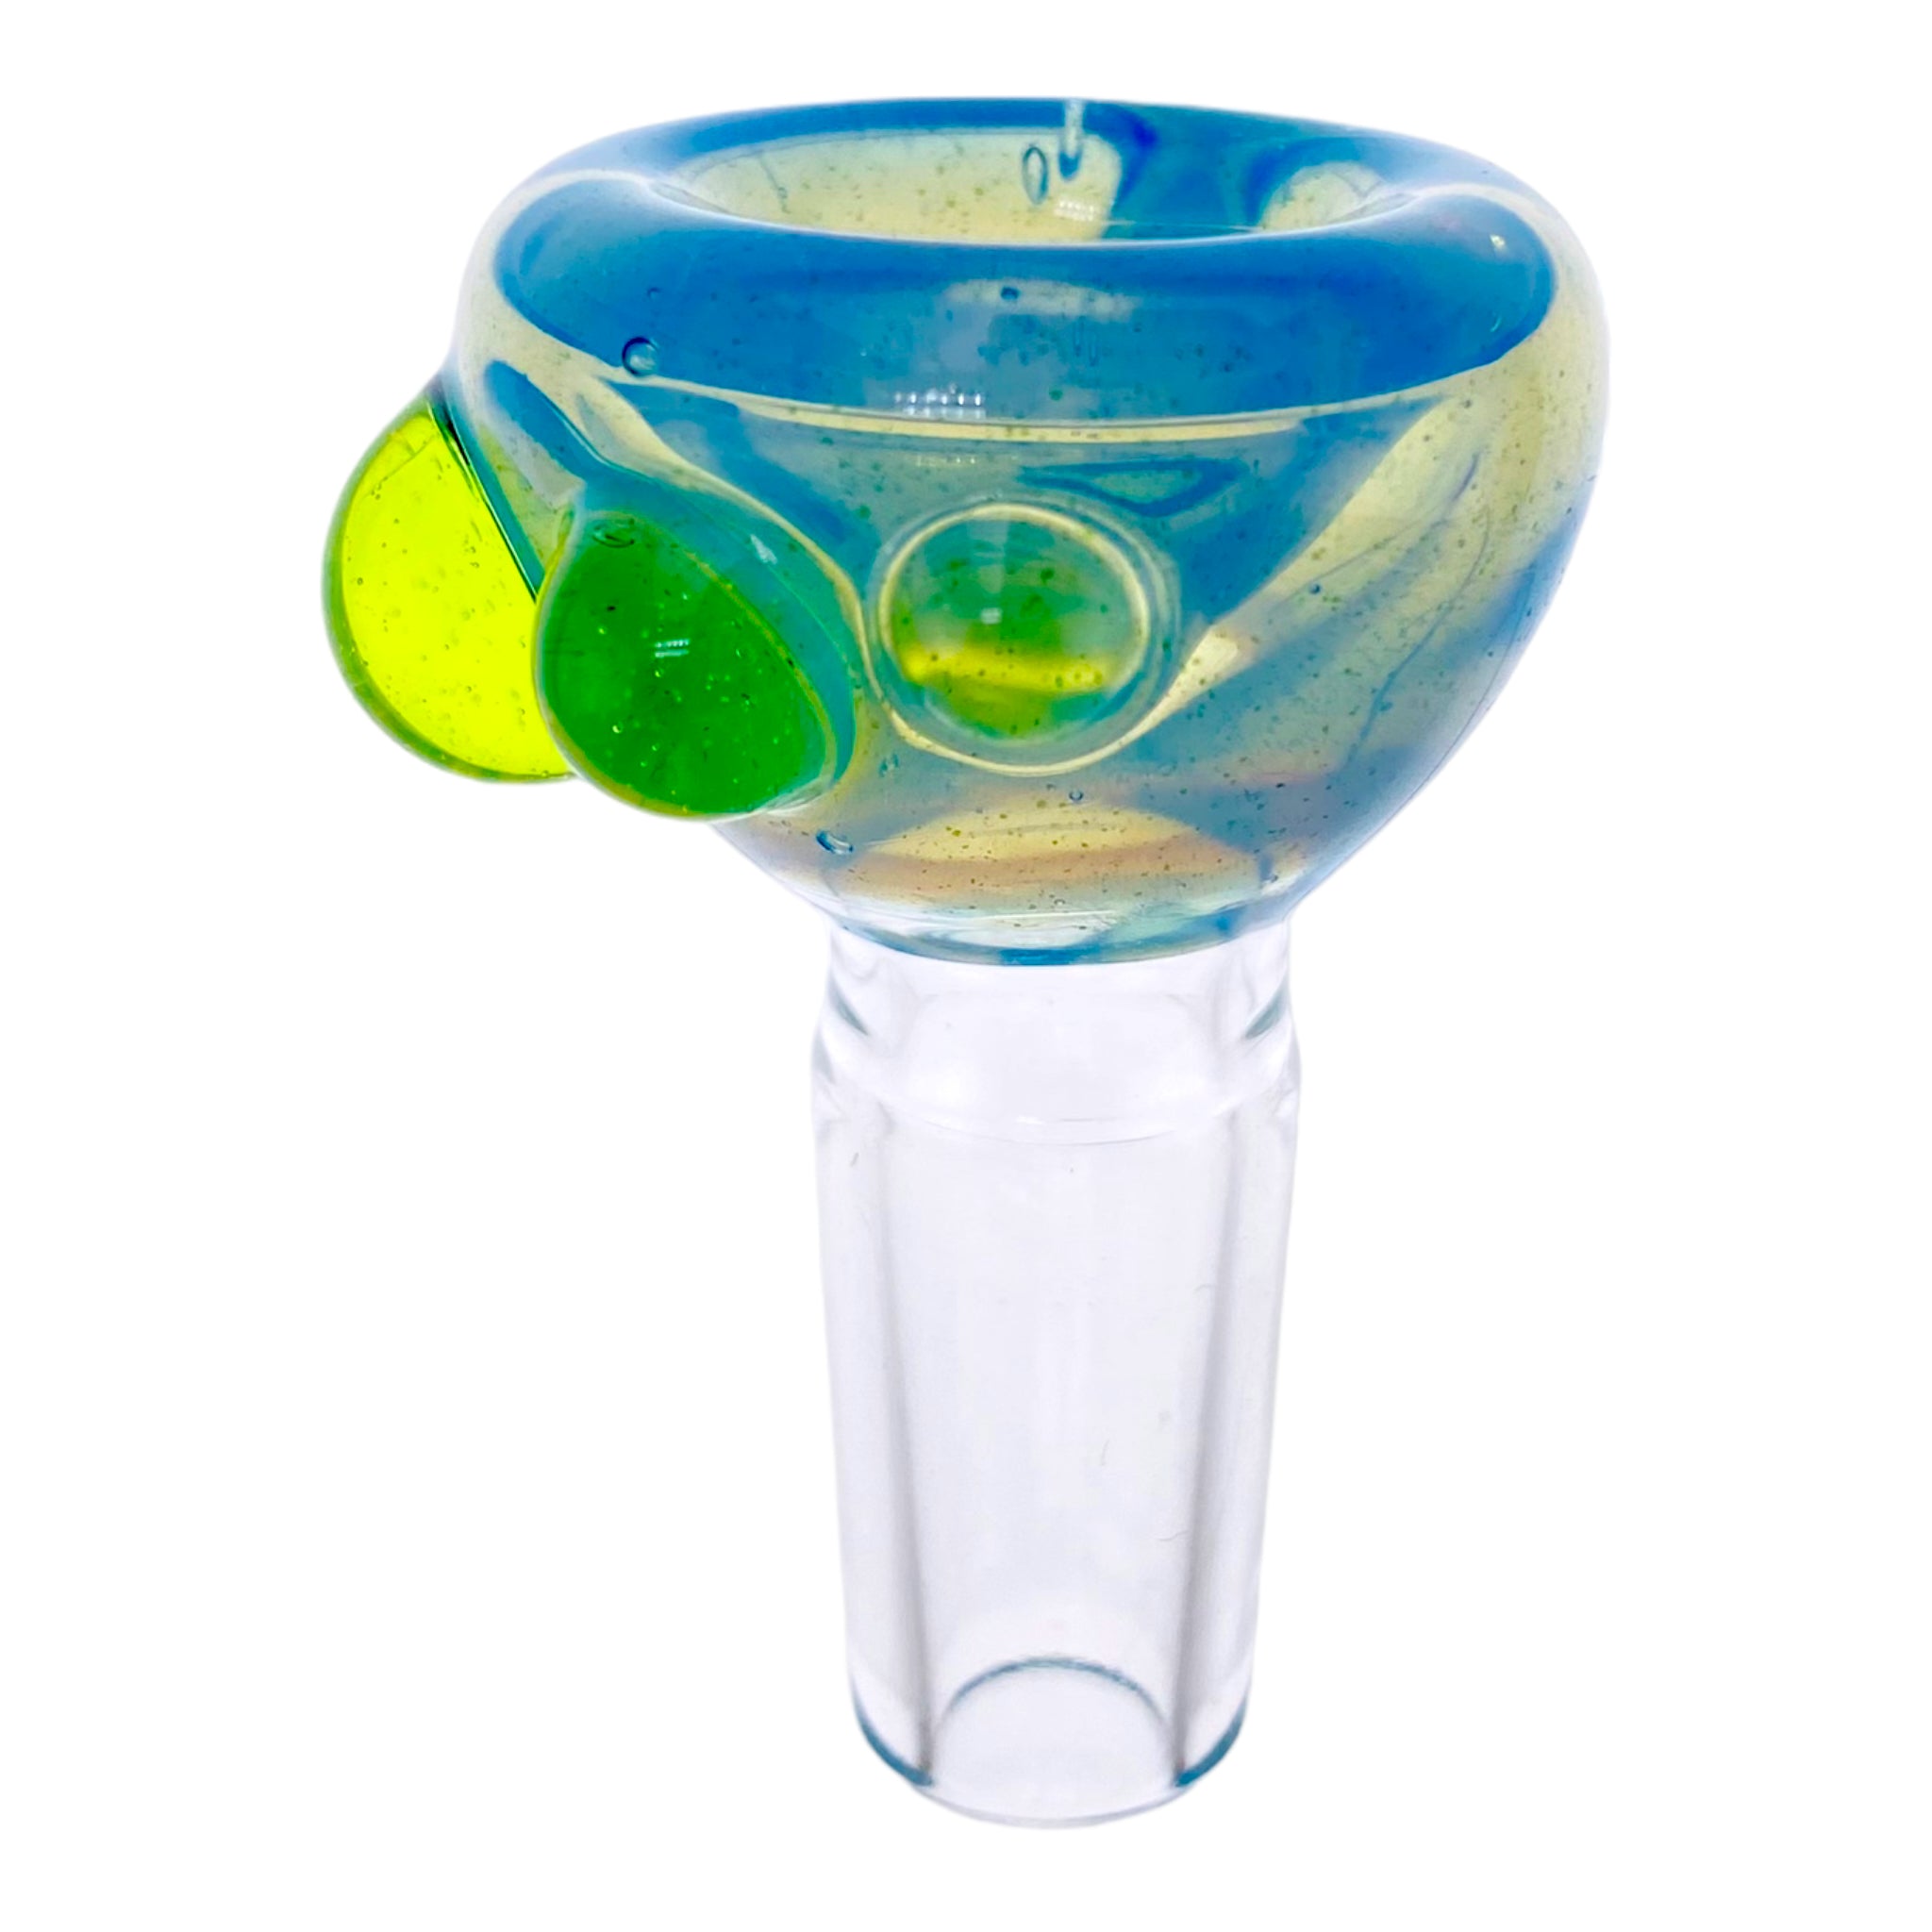 Arko Glass - 14mm Flower Bowl - Naruto Blue Bowl With Green Dots